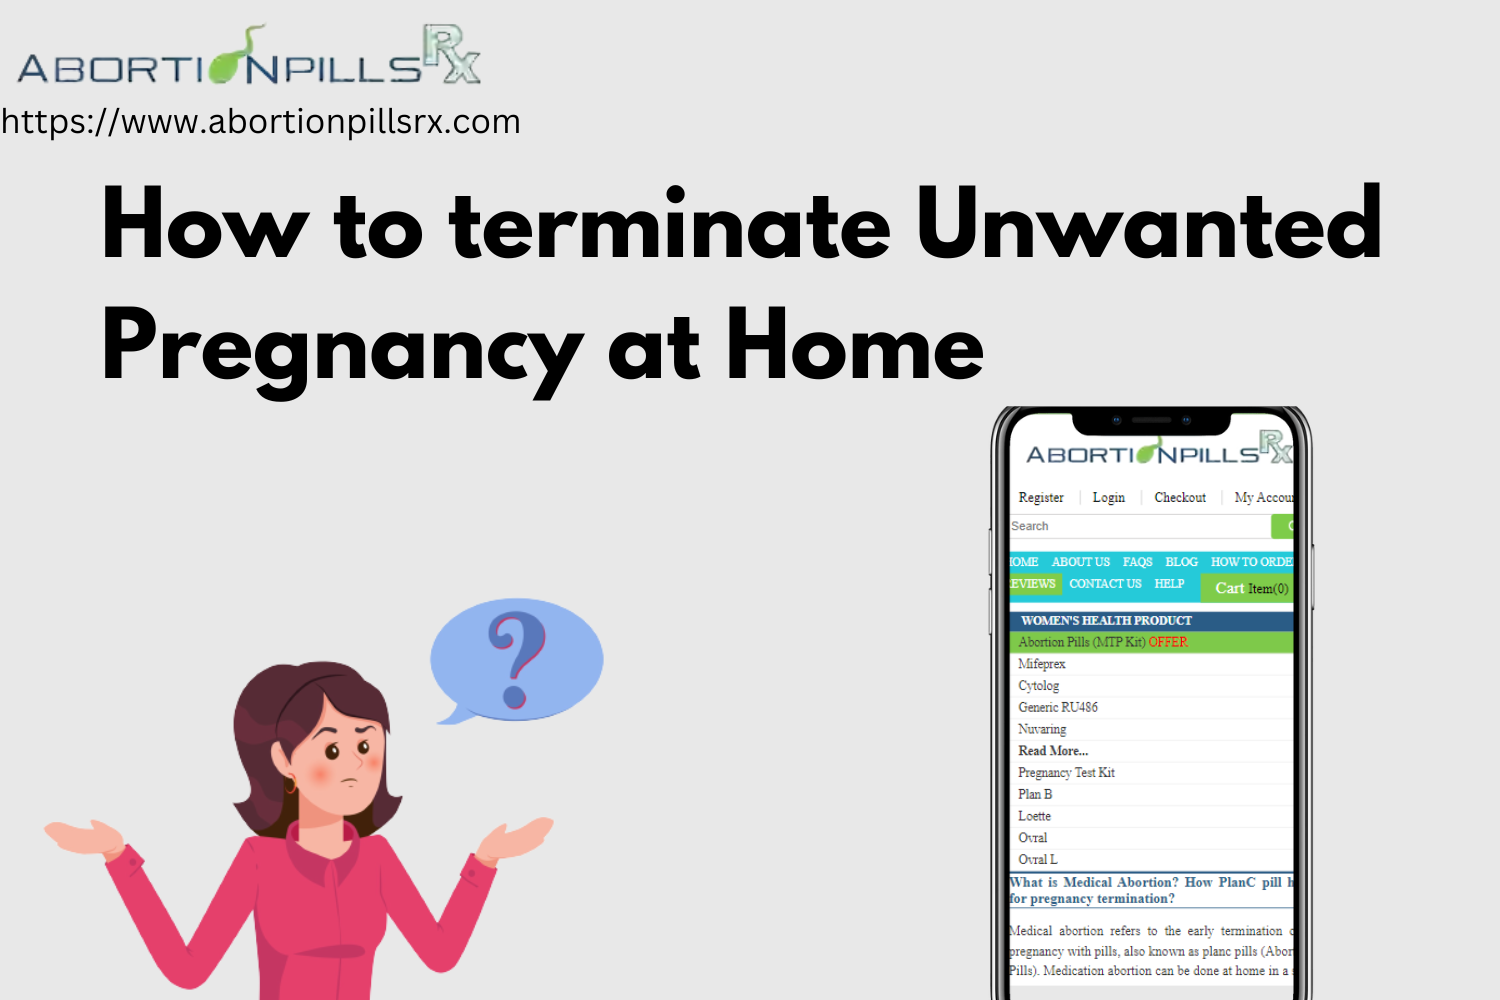 Image For Post | Dealing with an unwanted pregnancy is tough. To terminate an undesired gestation Buy abortion pills kit online which consist of Mifepristone and
Misoprostol pills helps to terminate pregnancy at home
Abortionpillsrx offers safe abortion pills online and express shipping. A customer can order and get the
product delivered within 48-72 hours.
https://www.abortionpillsrx.com